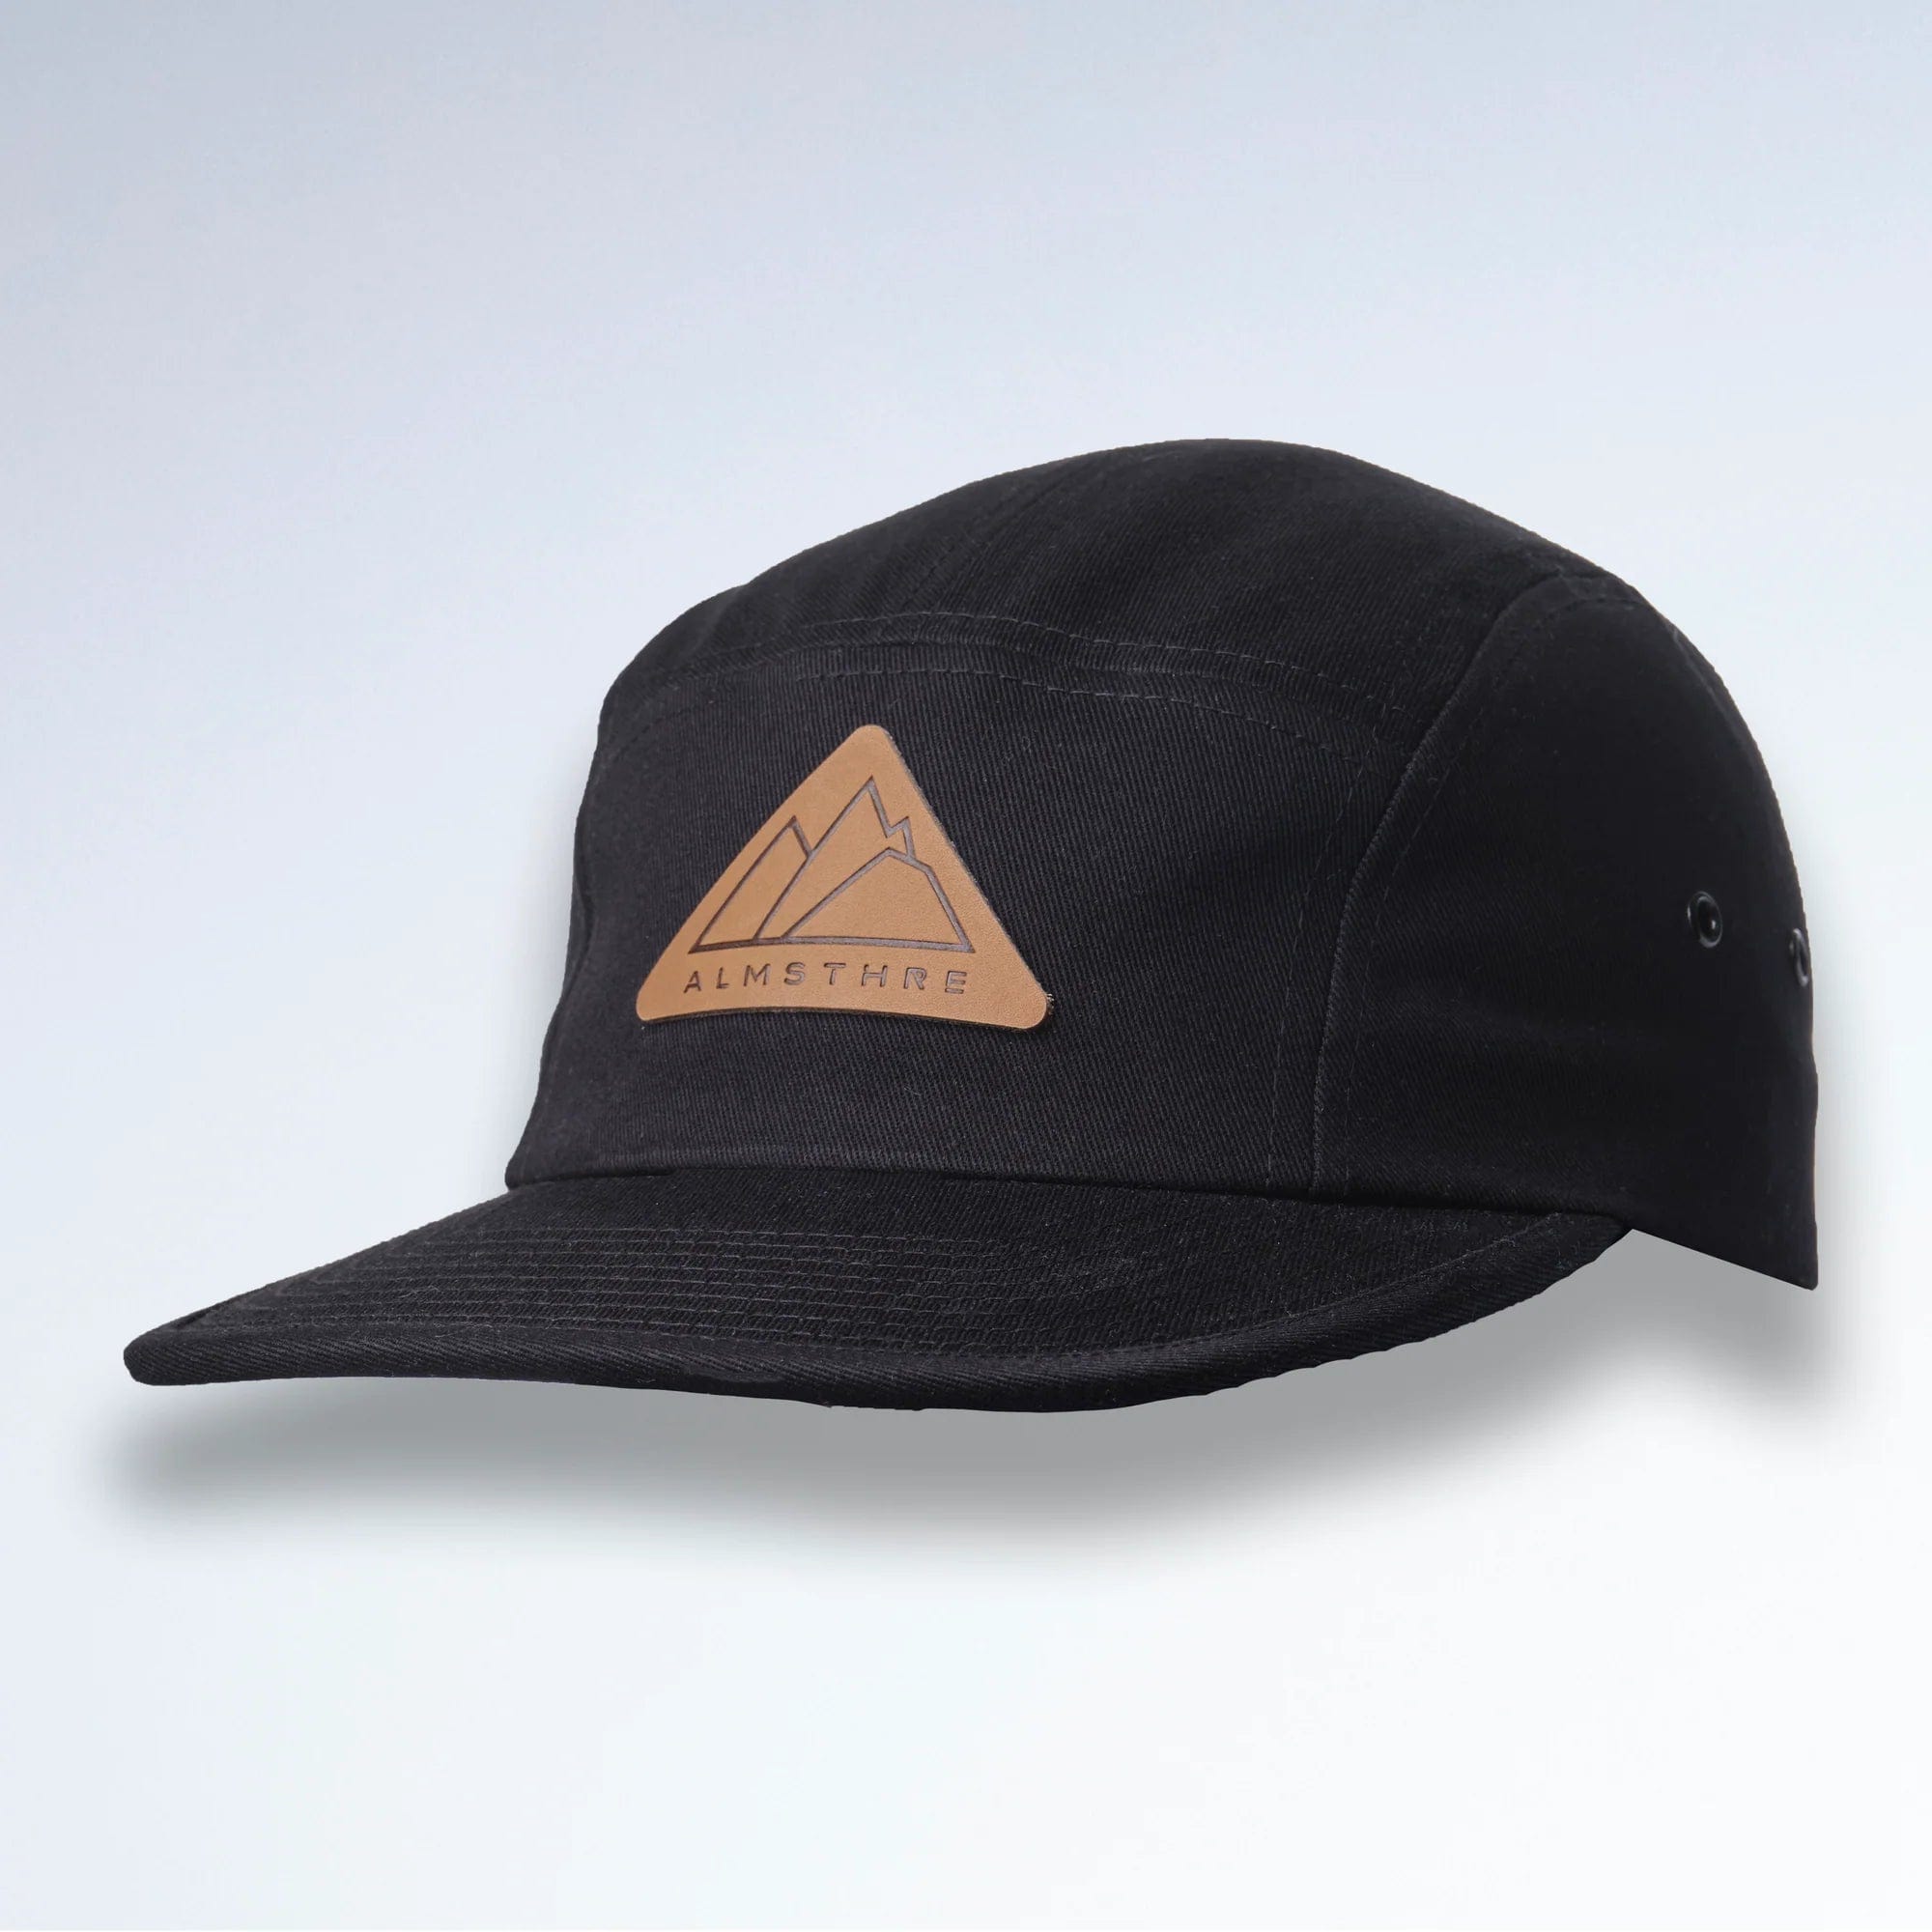 ALMSTHRE 5 Panel Hat Black Apparel - Clothing - Casual Hats